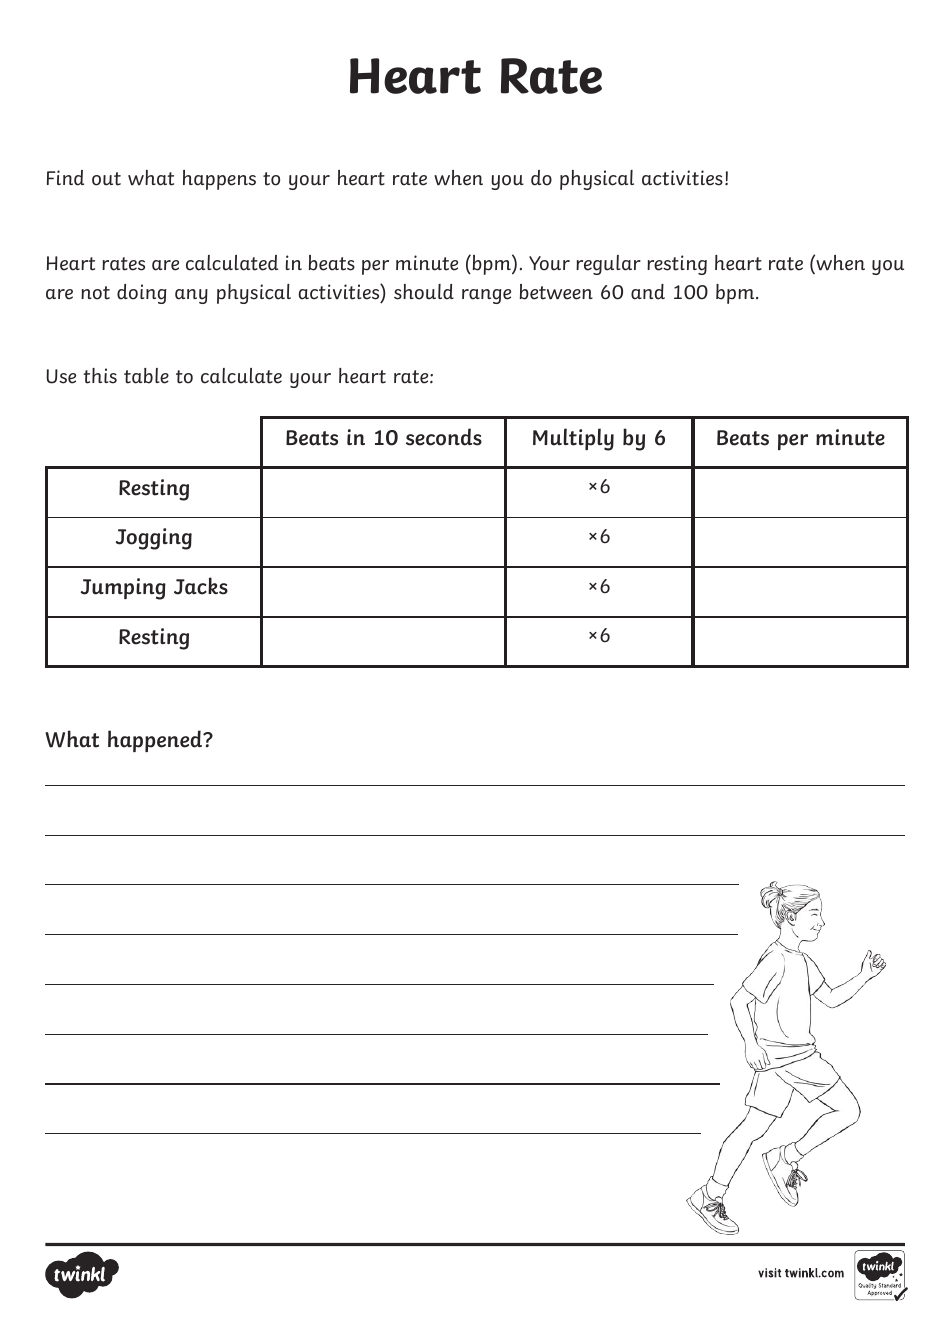 Heart Rate Calculation Chart with step-by-step instructions.